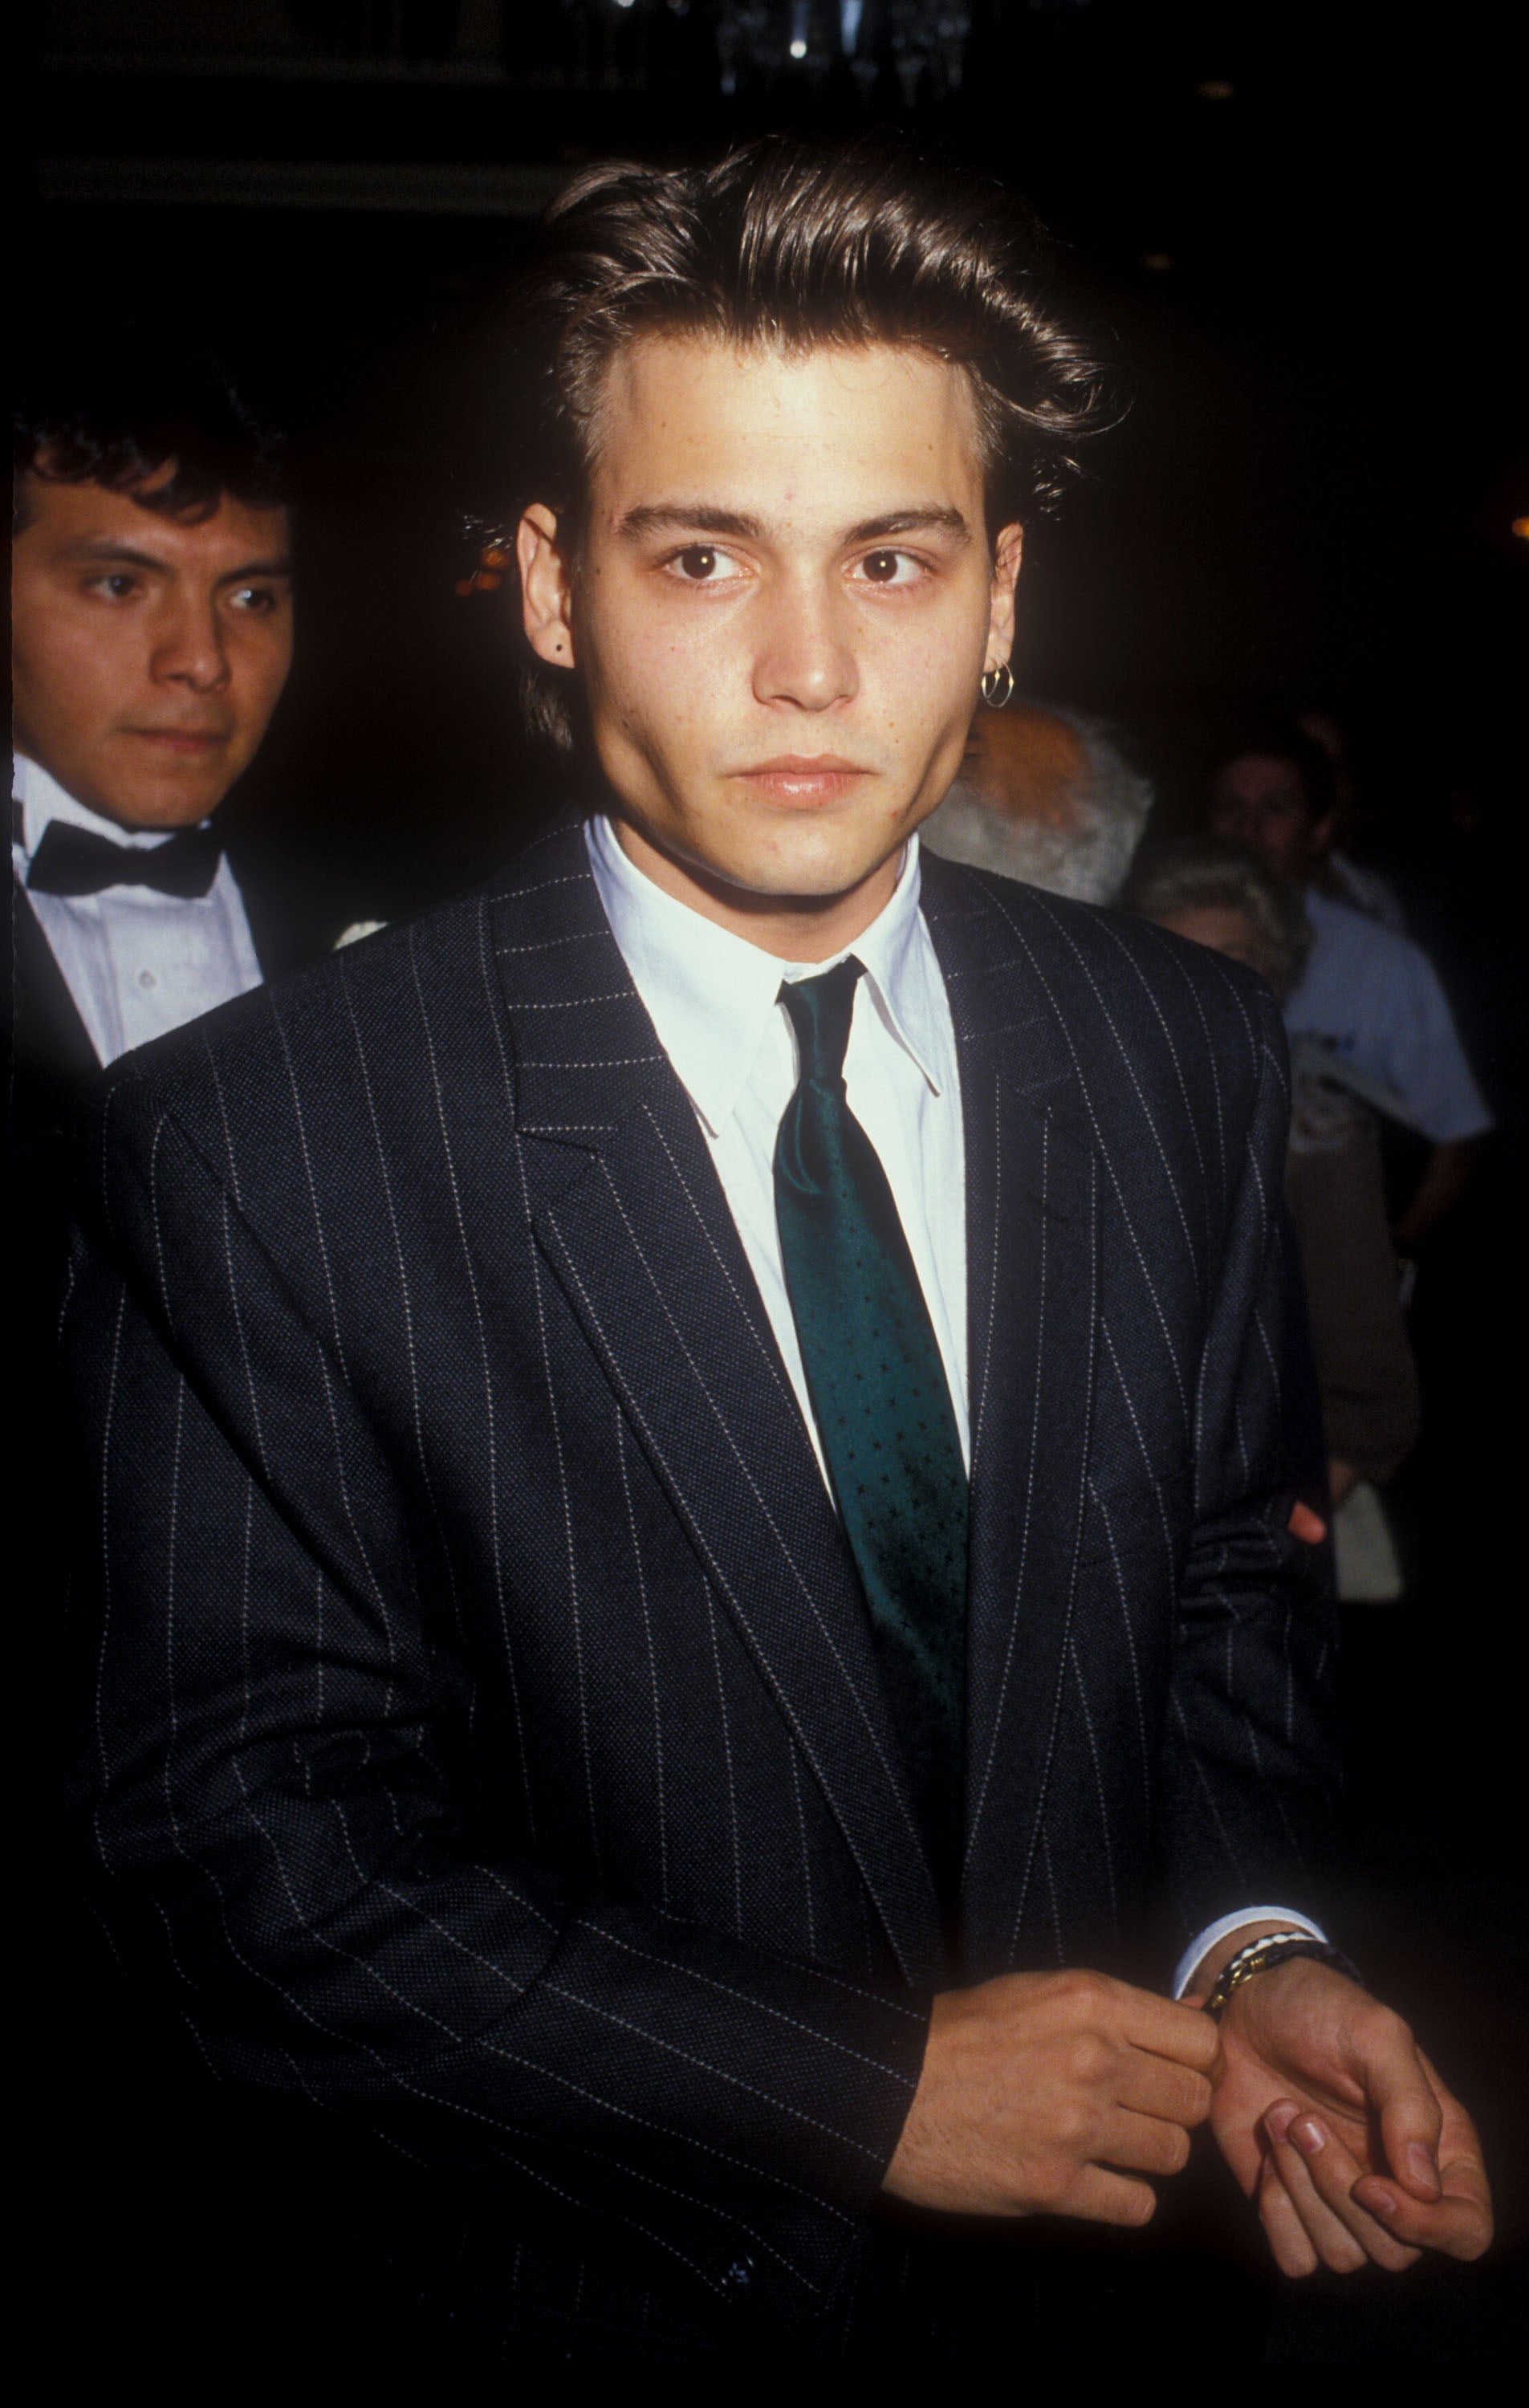 Johnny Depp in a pinstripe suit with a teal tie at an event